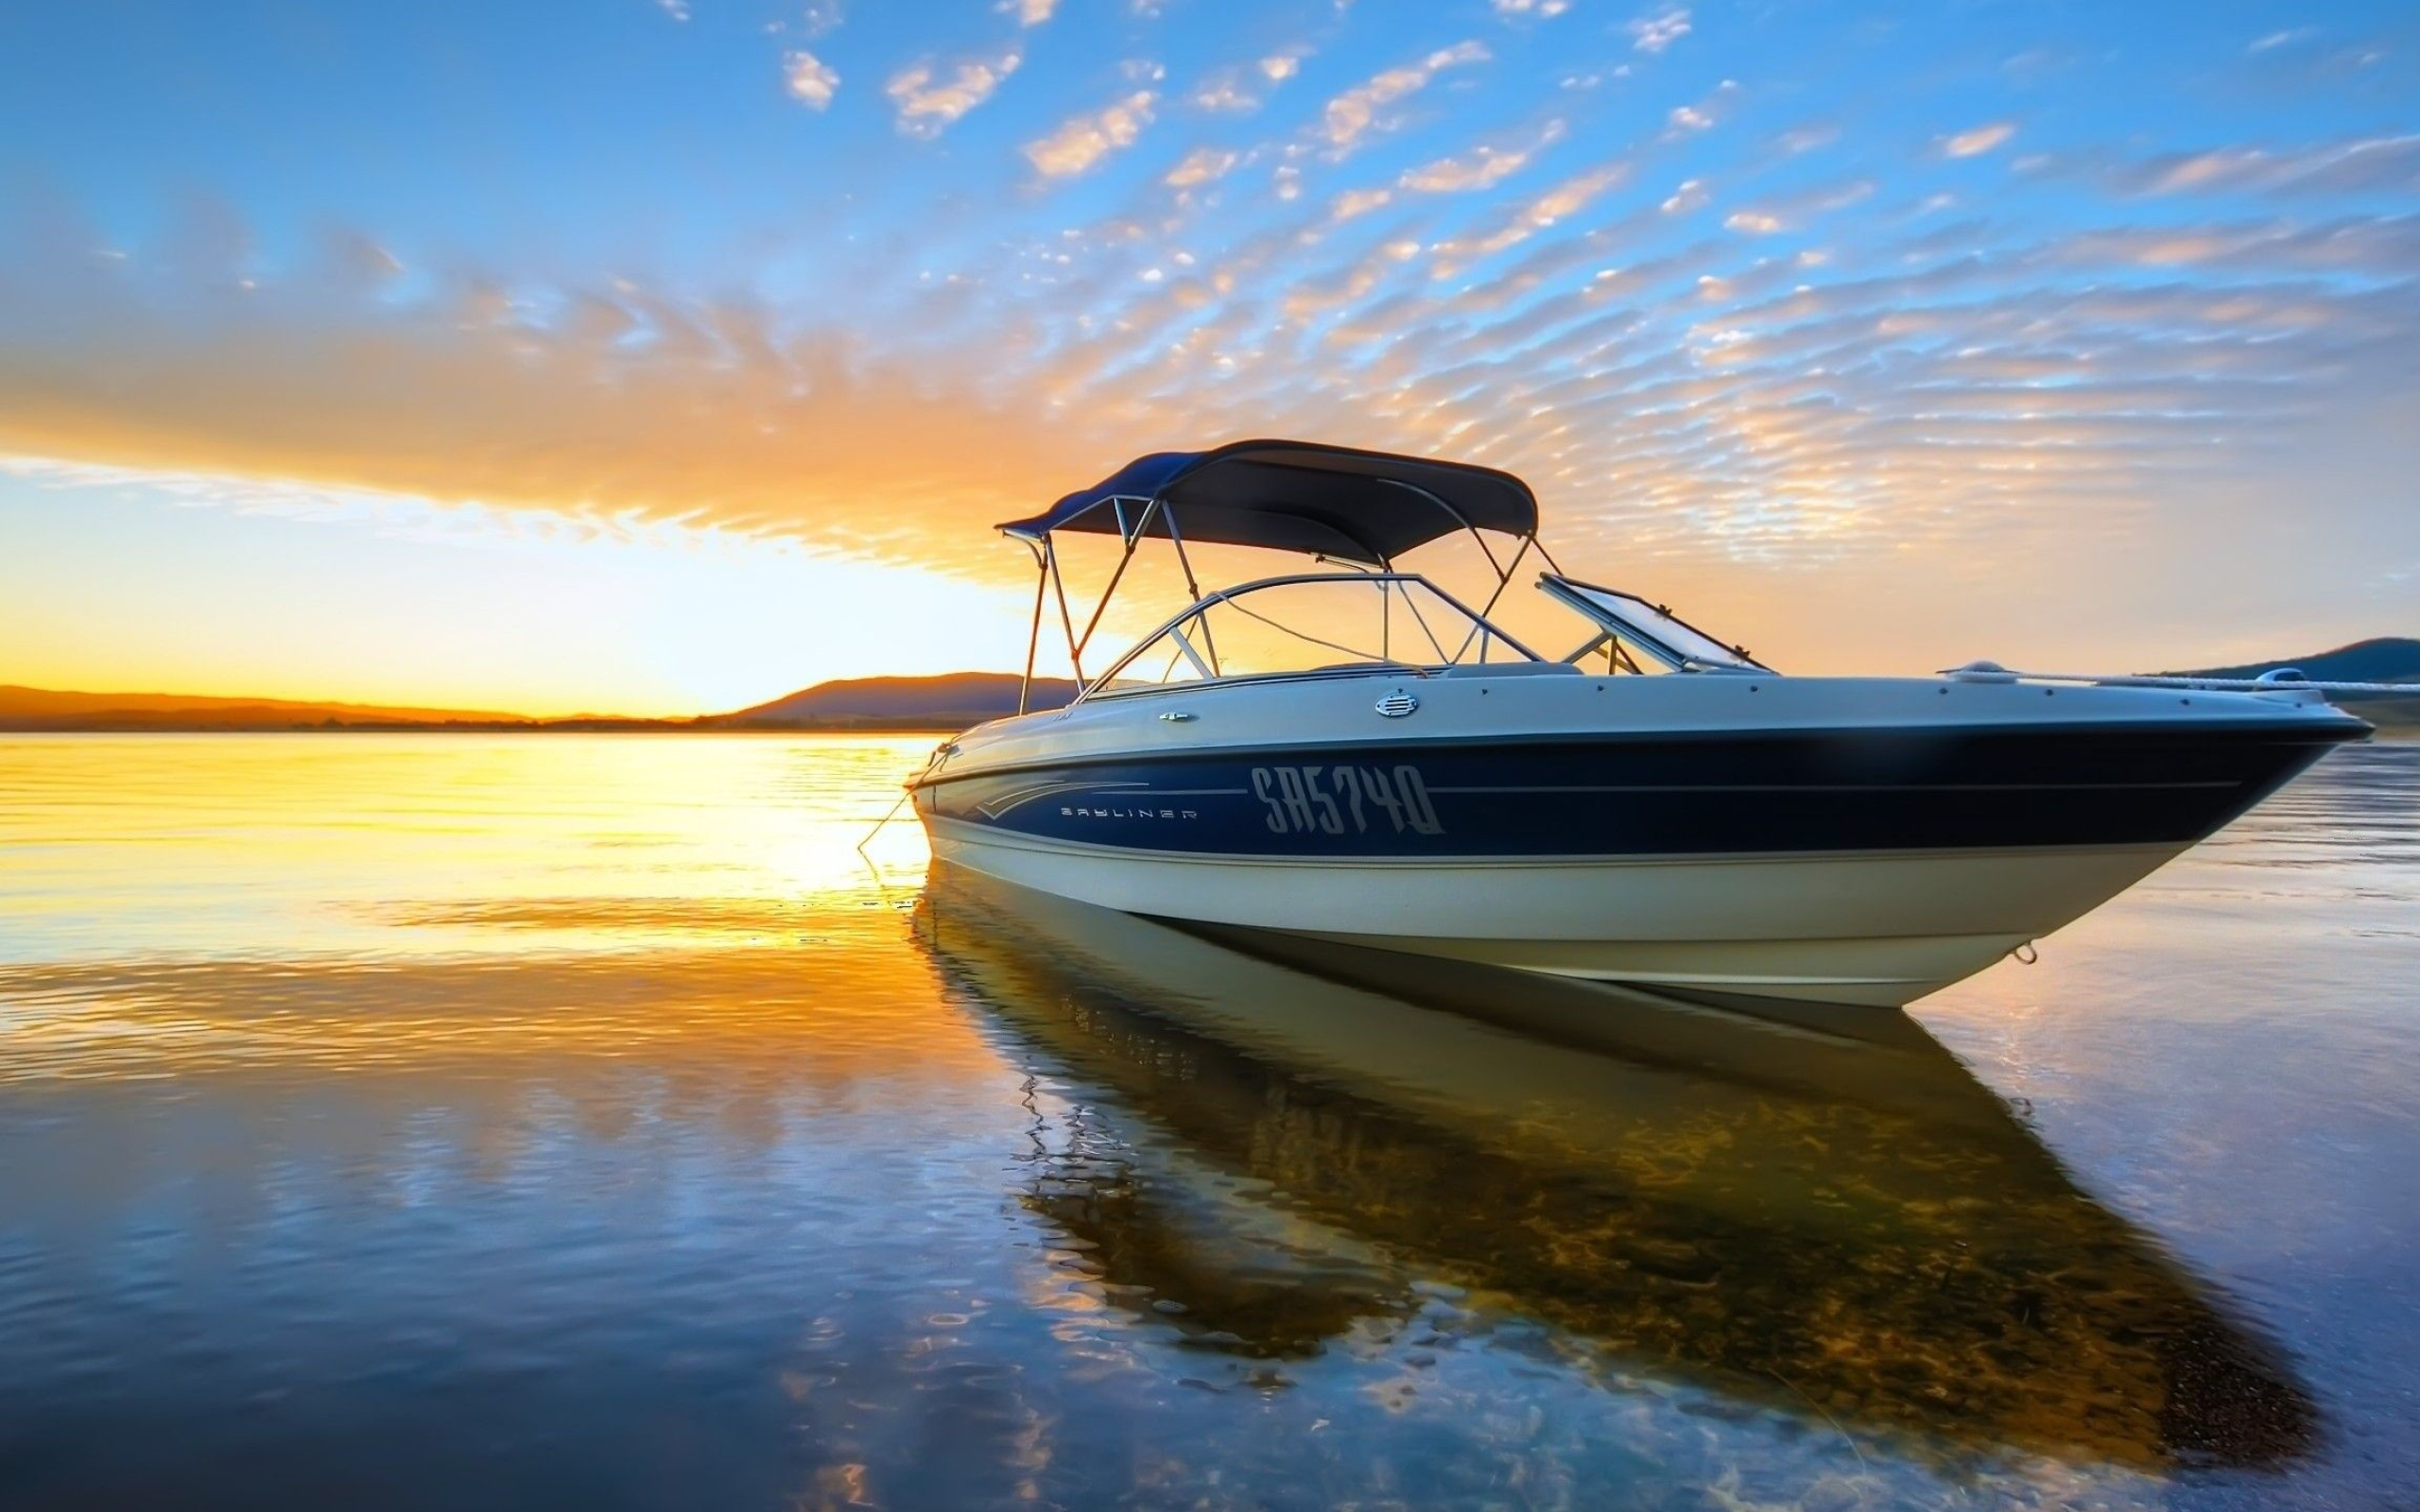 Pleasure Boat: A vessel operated primarily for leisure, Watercraft. 2560x1600 HD Wallpaper.